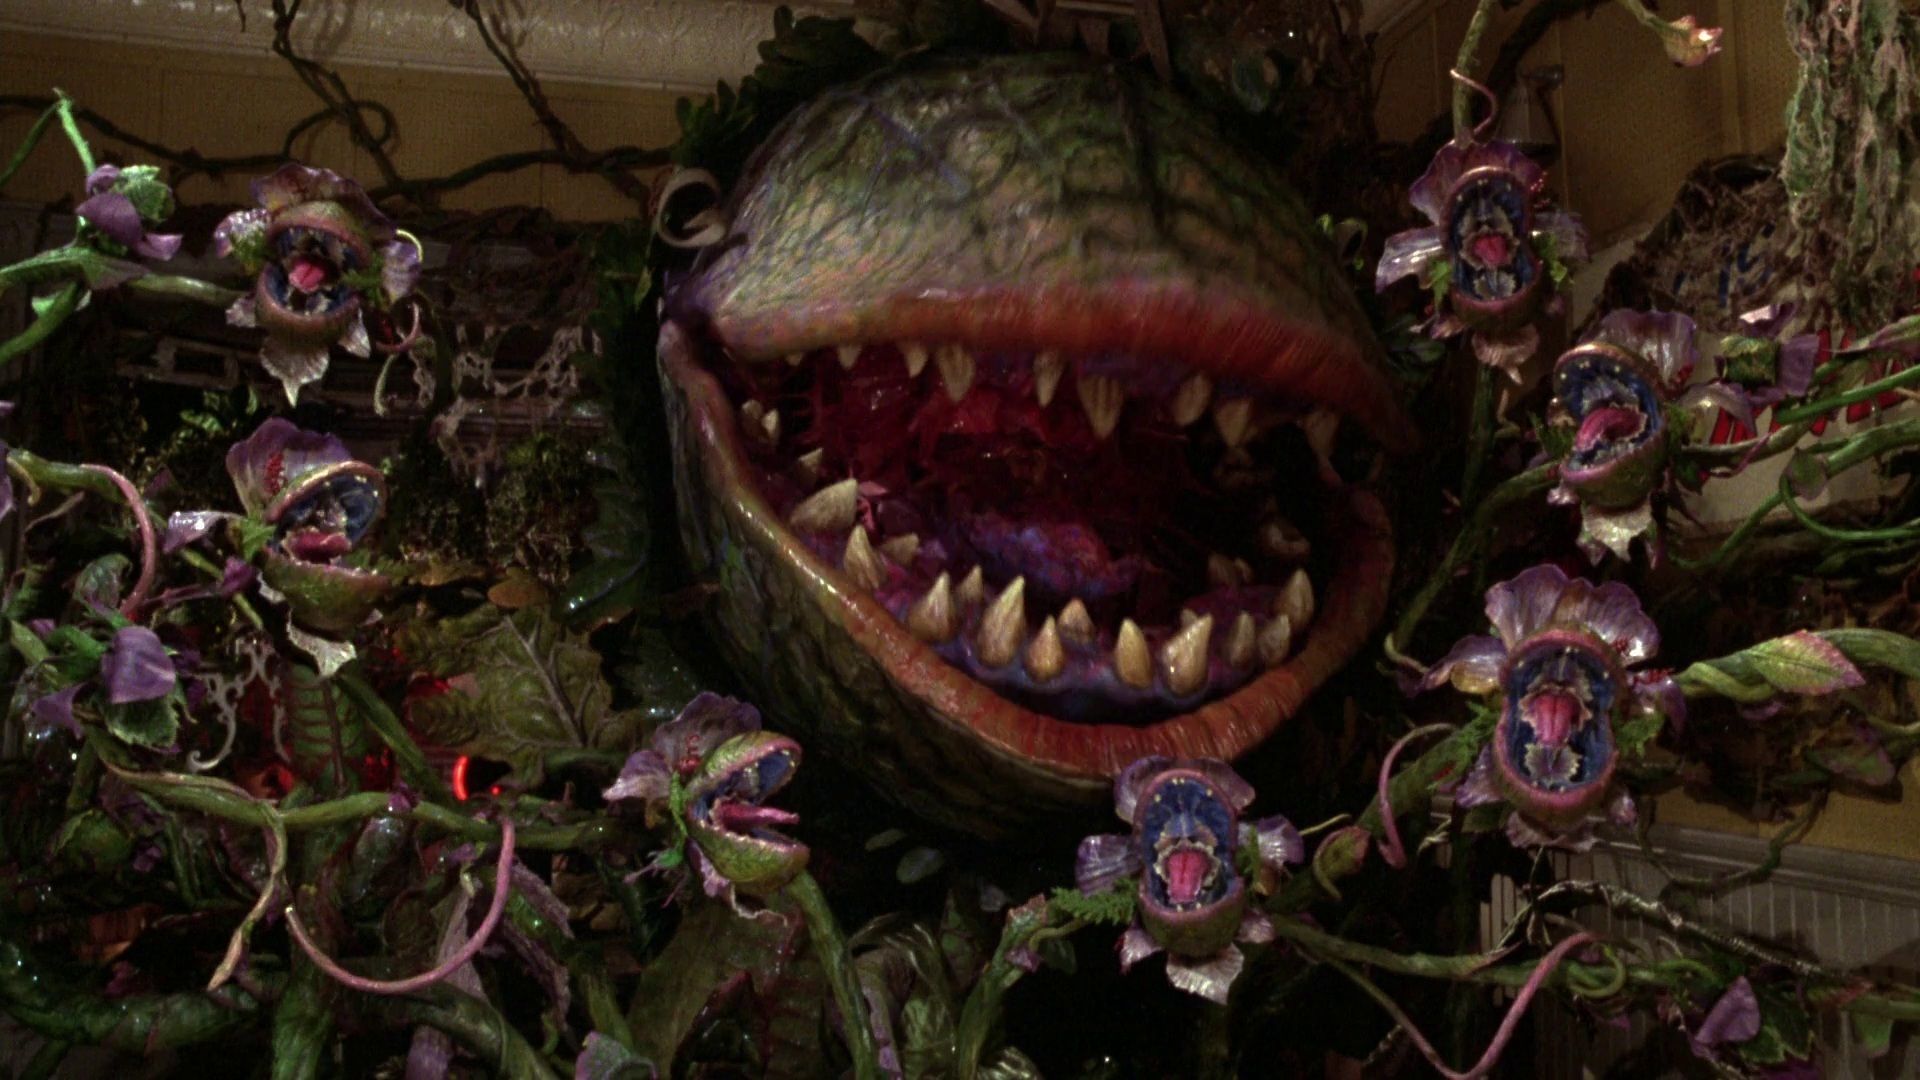 Chosen One of the Day: Audrey II from Little Shop of Horrors